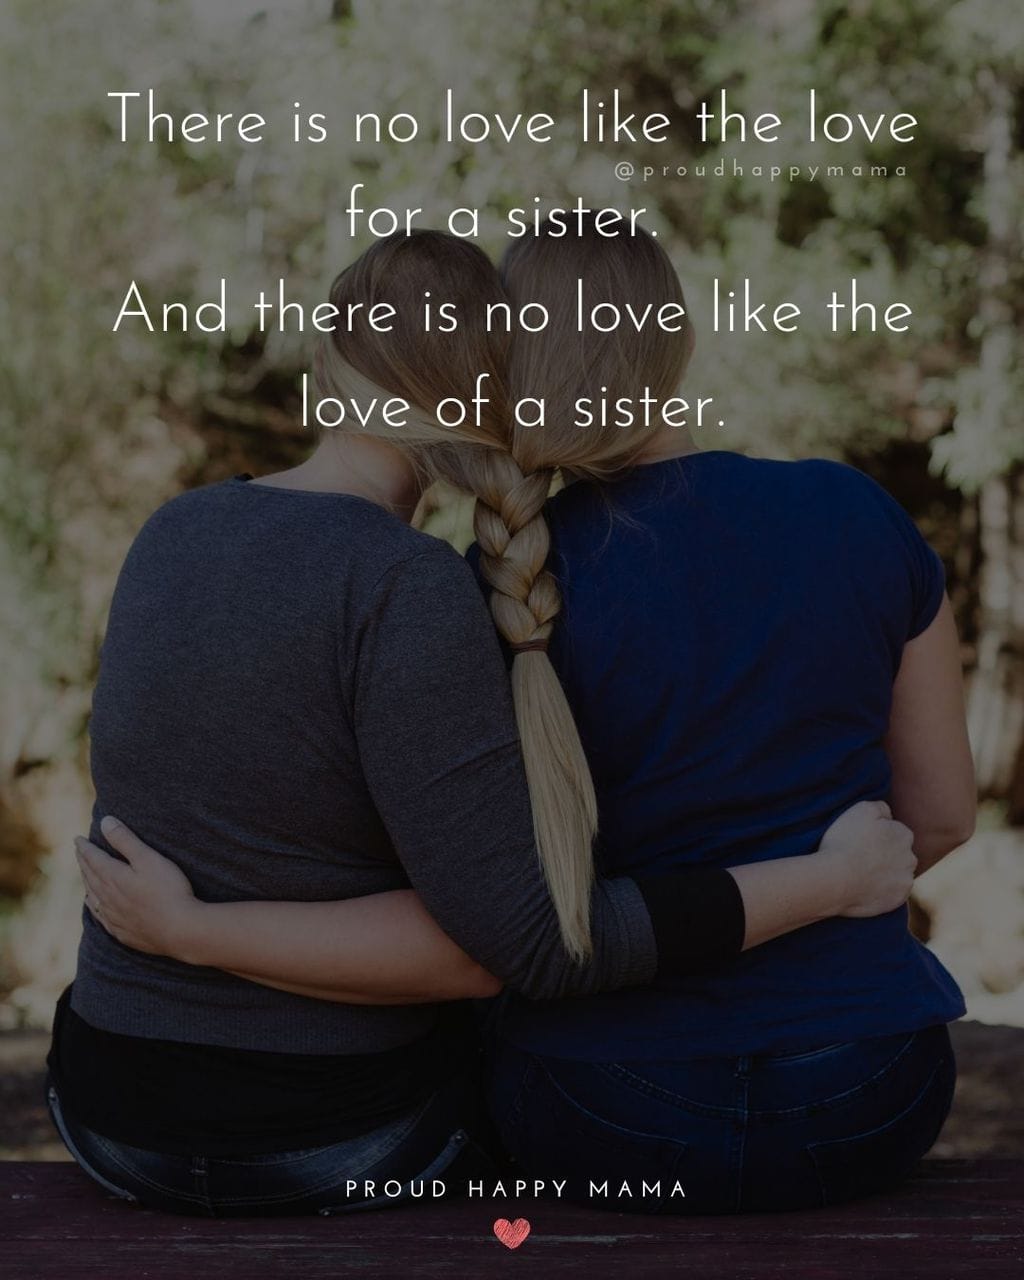 Sister Quotes - There is no love like the love for a sister. And there is no love like the love of a sister